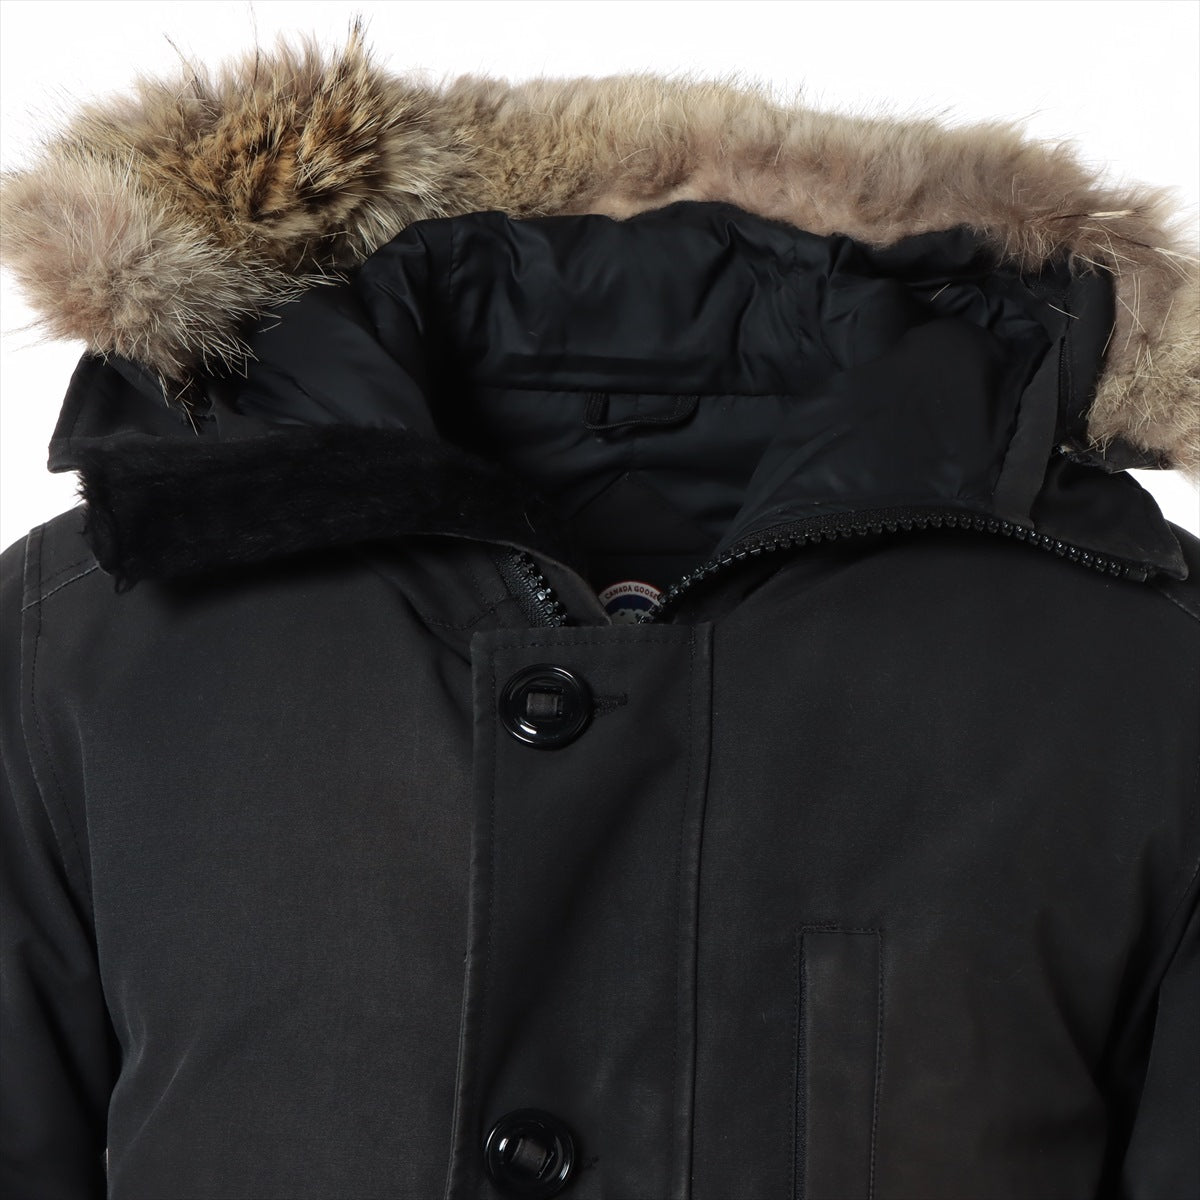 Canada Goose JASPER Cotton x polyester x nylon Down jacket S/P Black  3438JM Sotheby Removable fur There is burns Dirt in a few places The cuffs are flabby